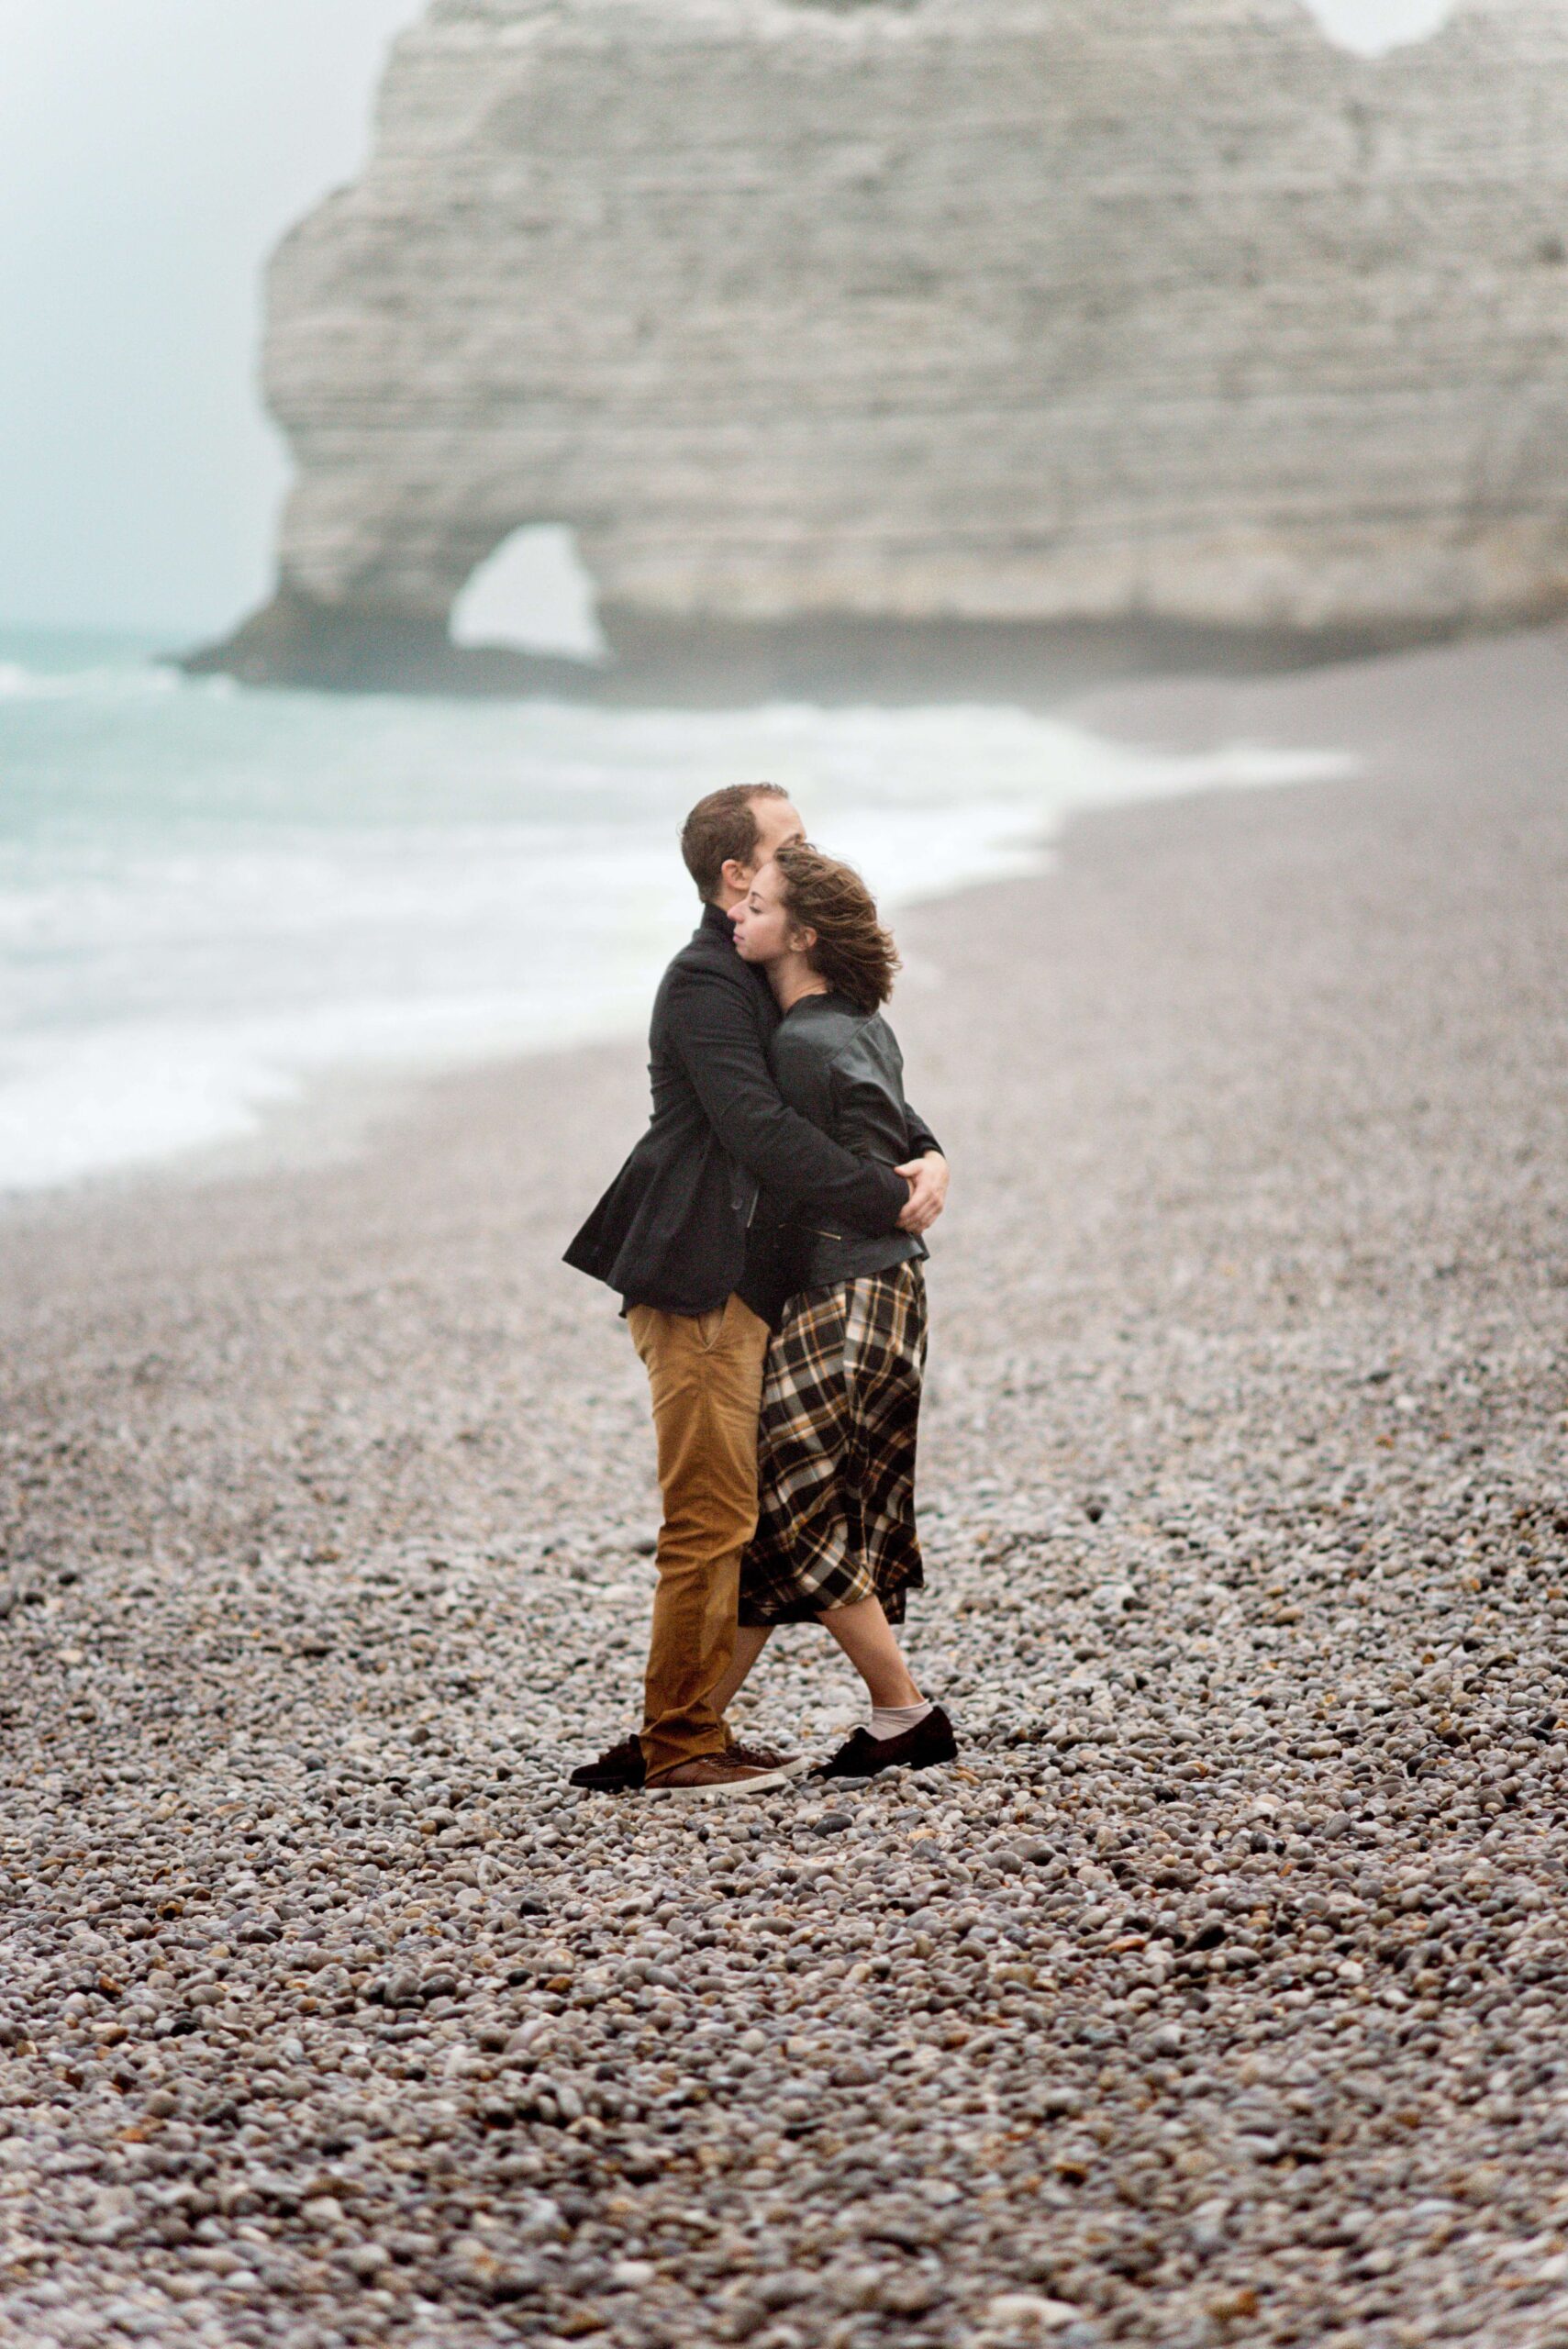 Image of a couple hugging and supporting each other while standing on a rocky beach on a cloudy day. Discover how Saible Neuropsychology can provide you support through trauma therapy and PTSD treatment in Saint Petersburg, FL and begin coping with your symptoms in healthy ways.